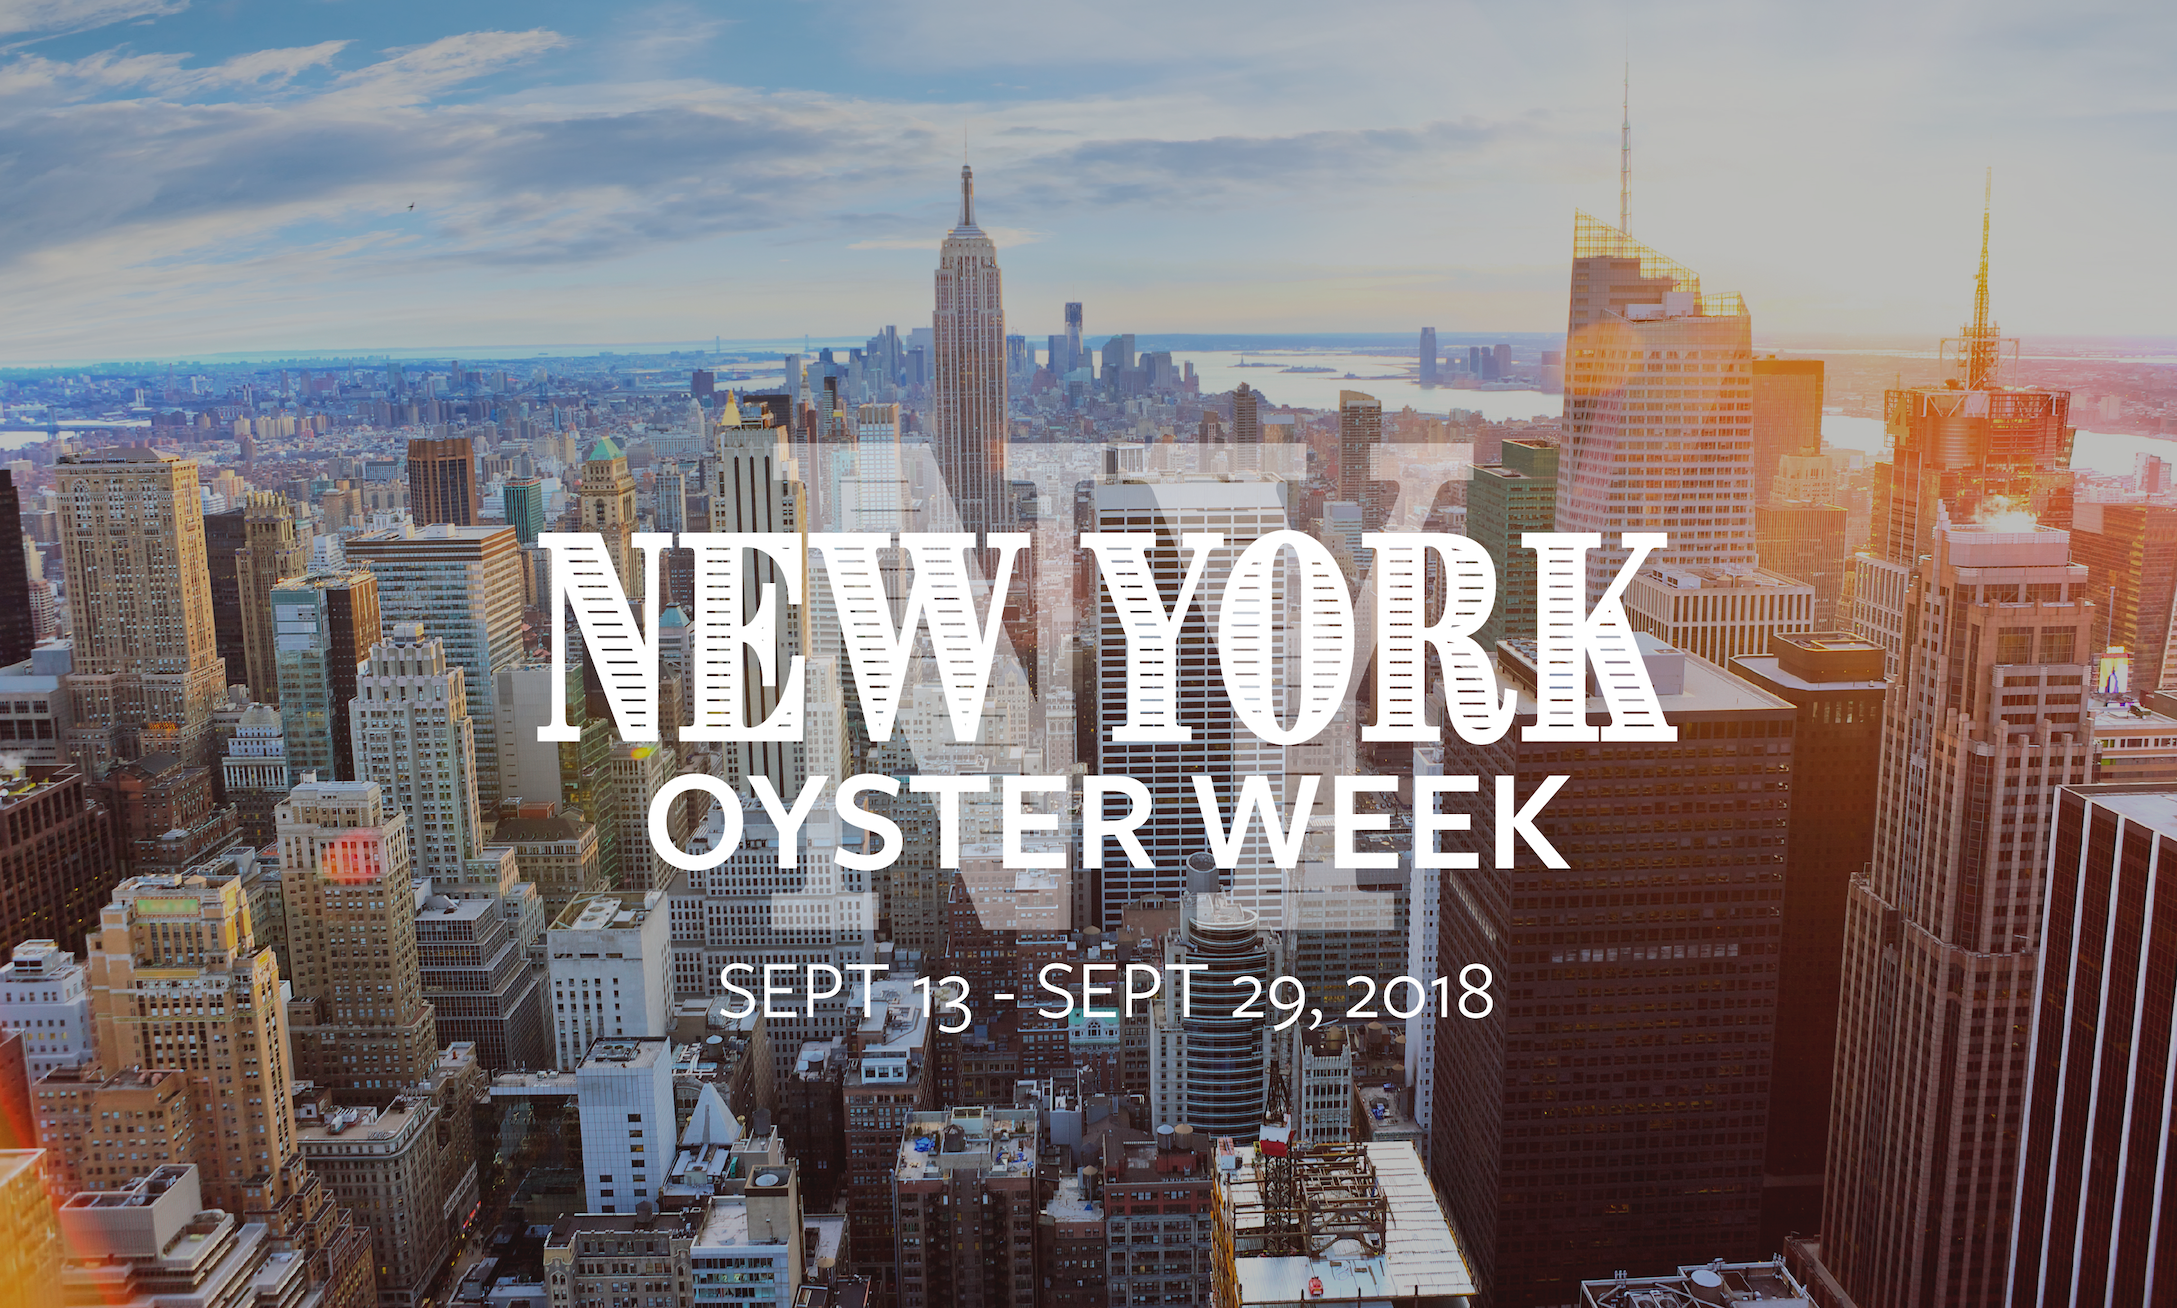 New York Oyster Week on image 3 2.png